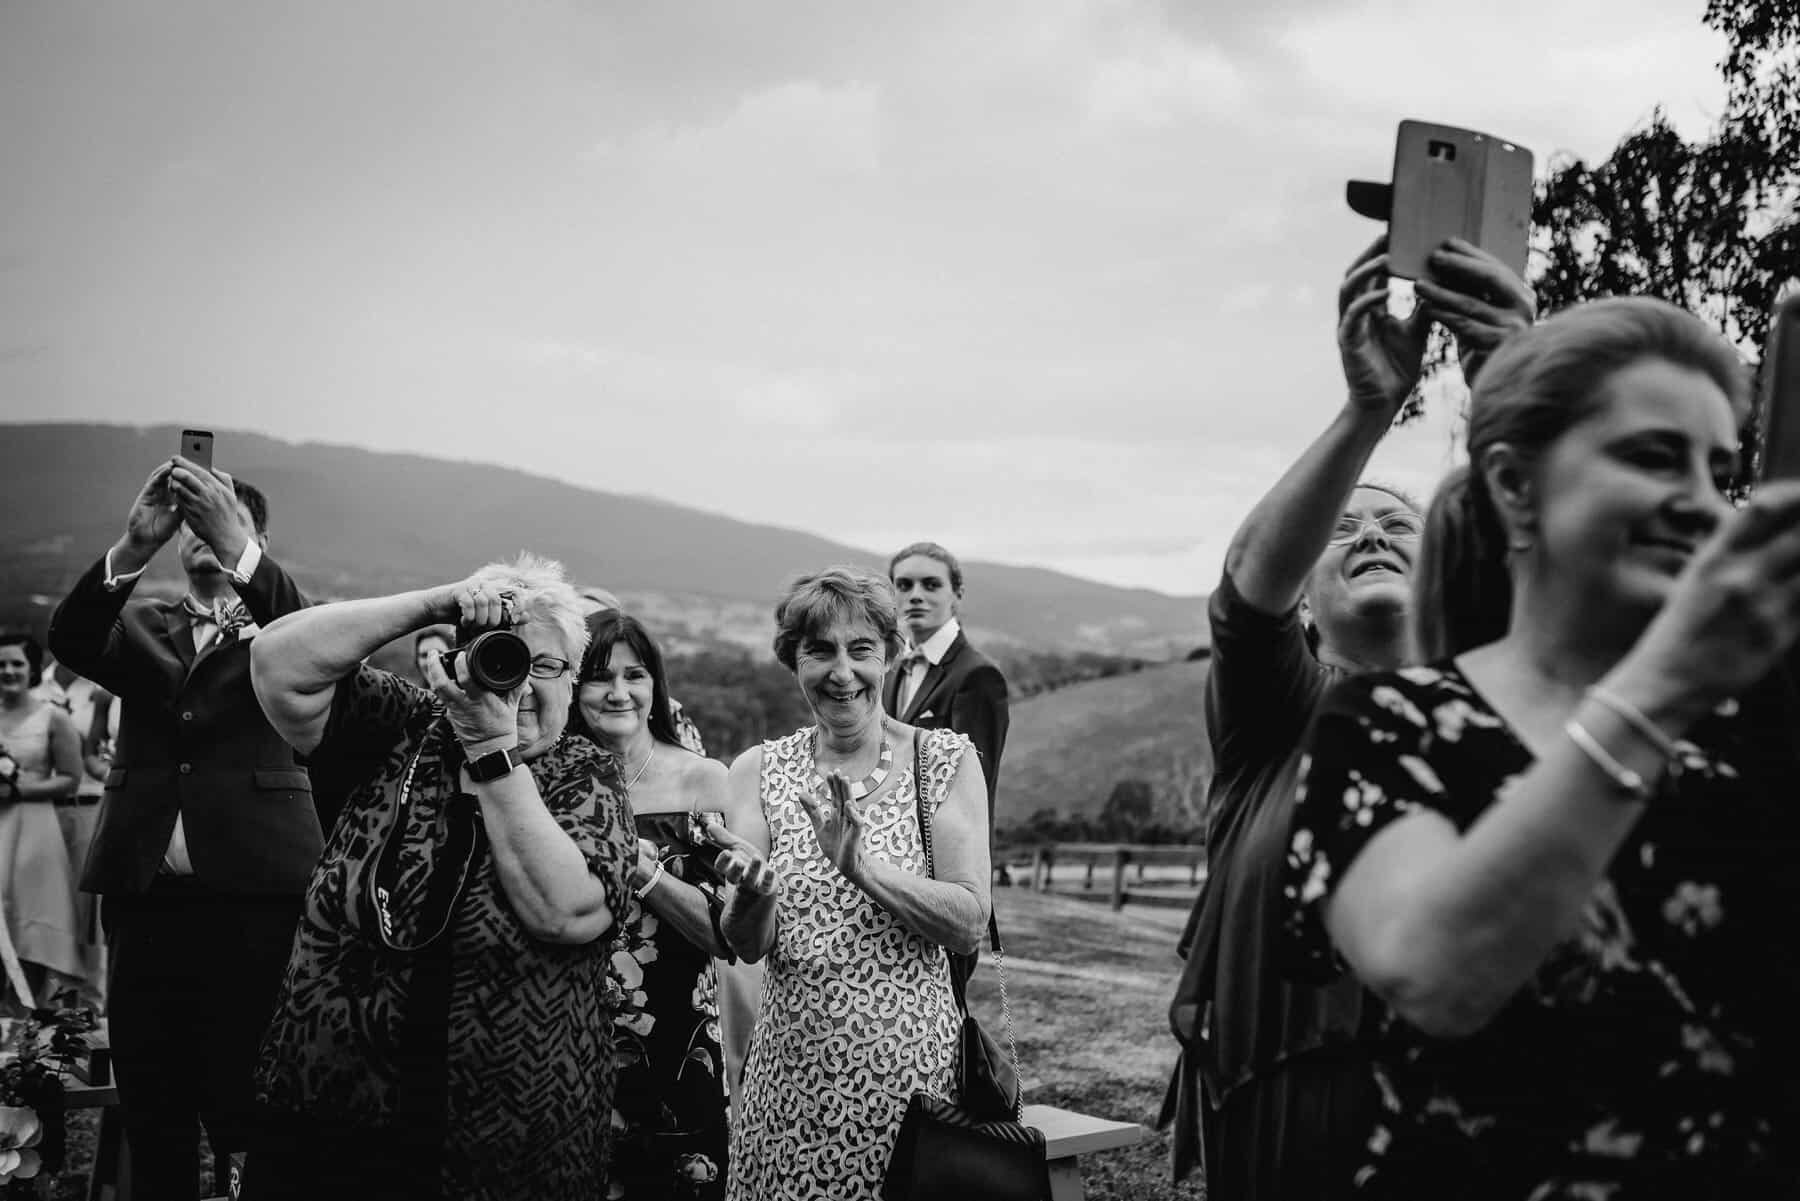 Yarra Valley winery wedding at Riverstone Estate - photography by Enchanted Weddings